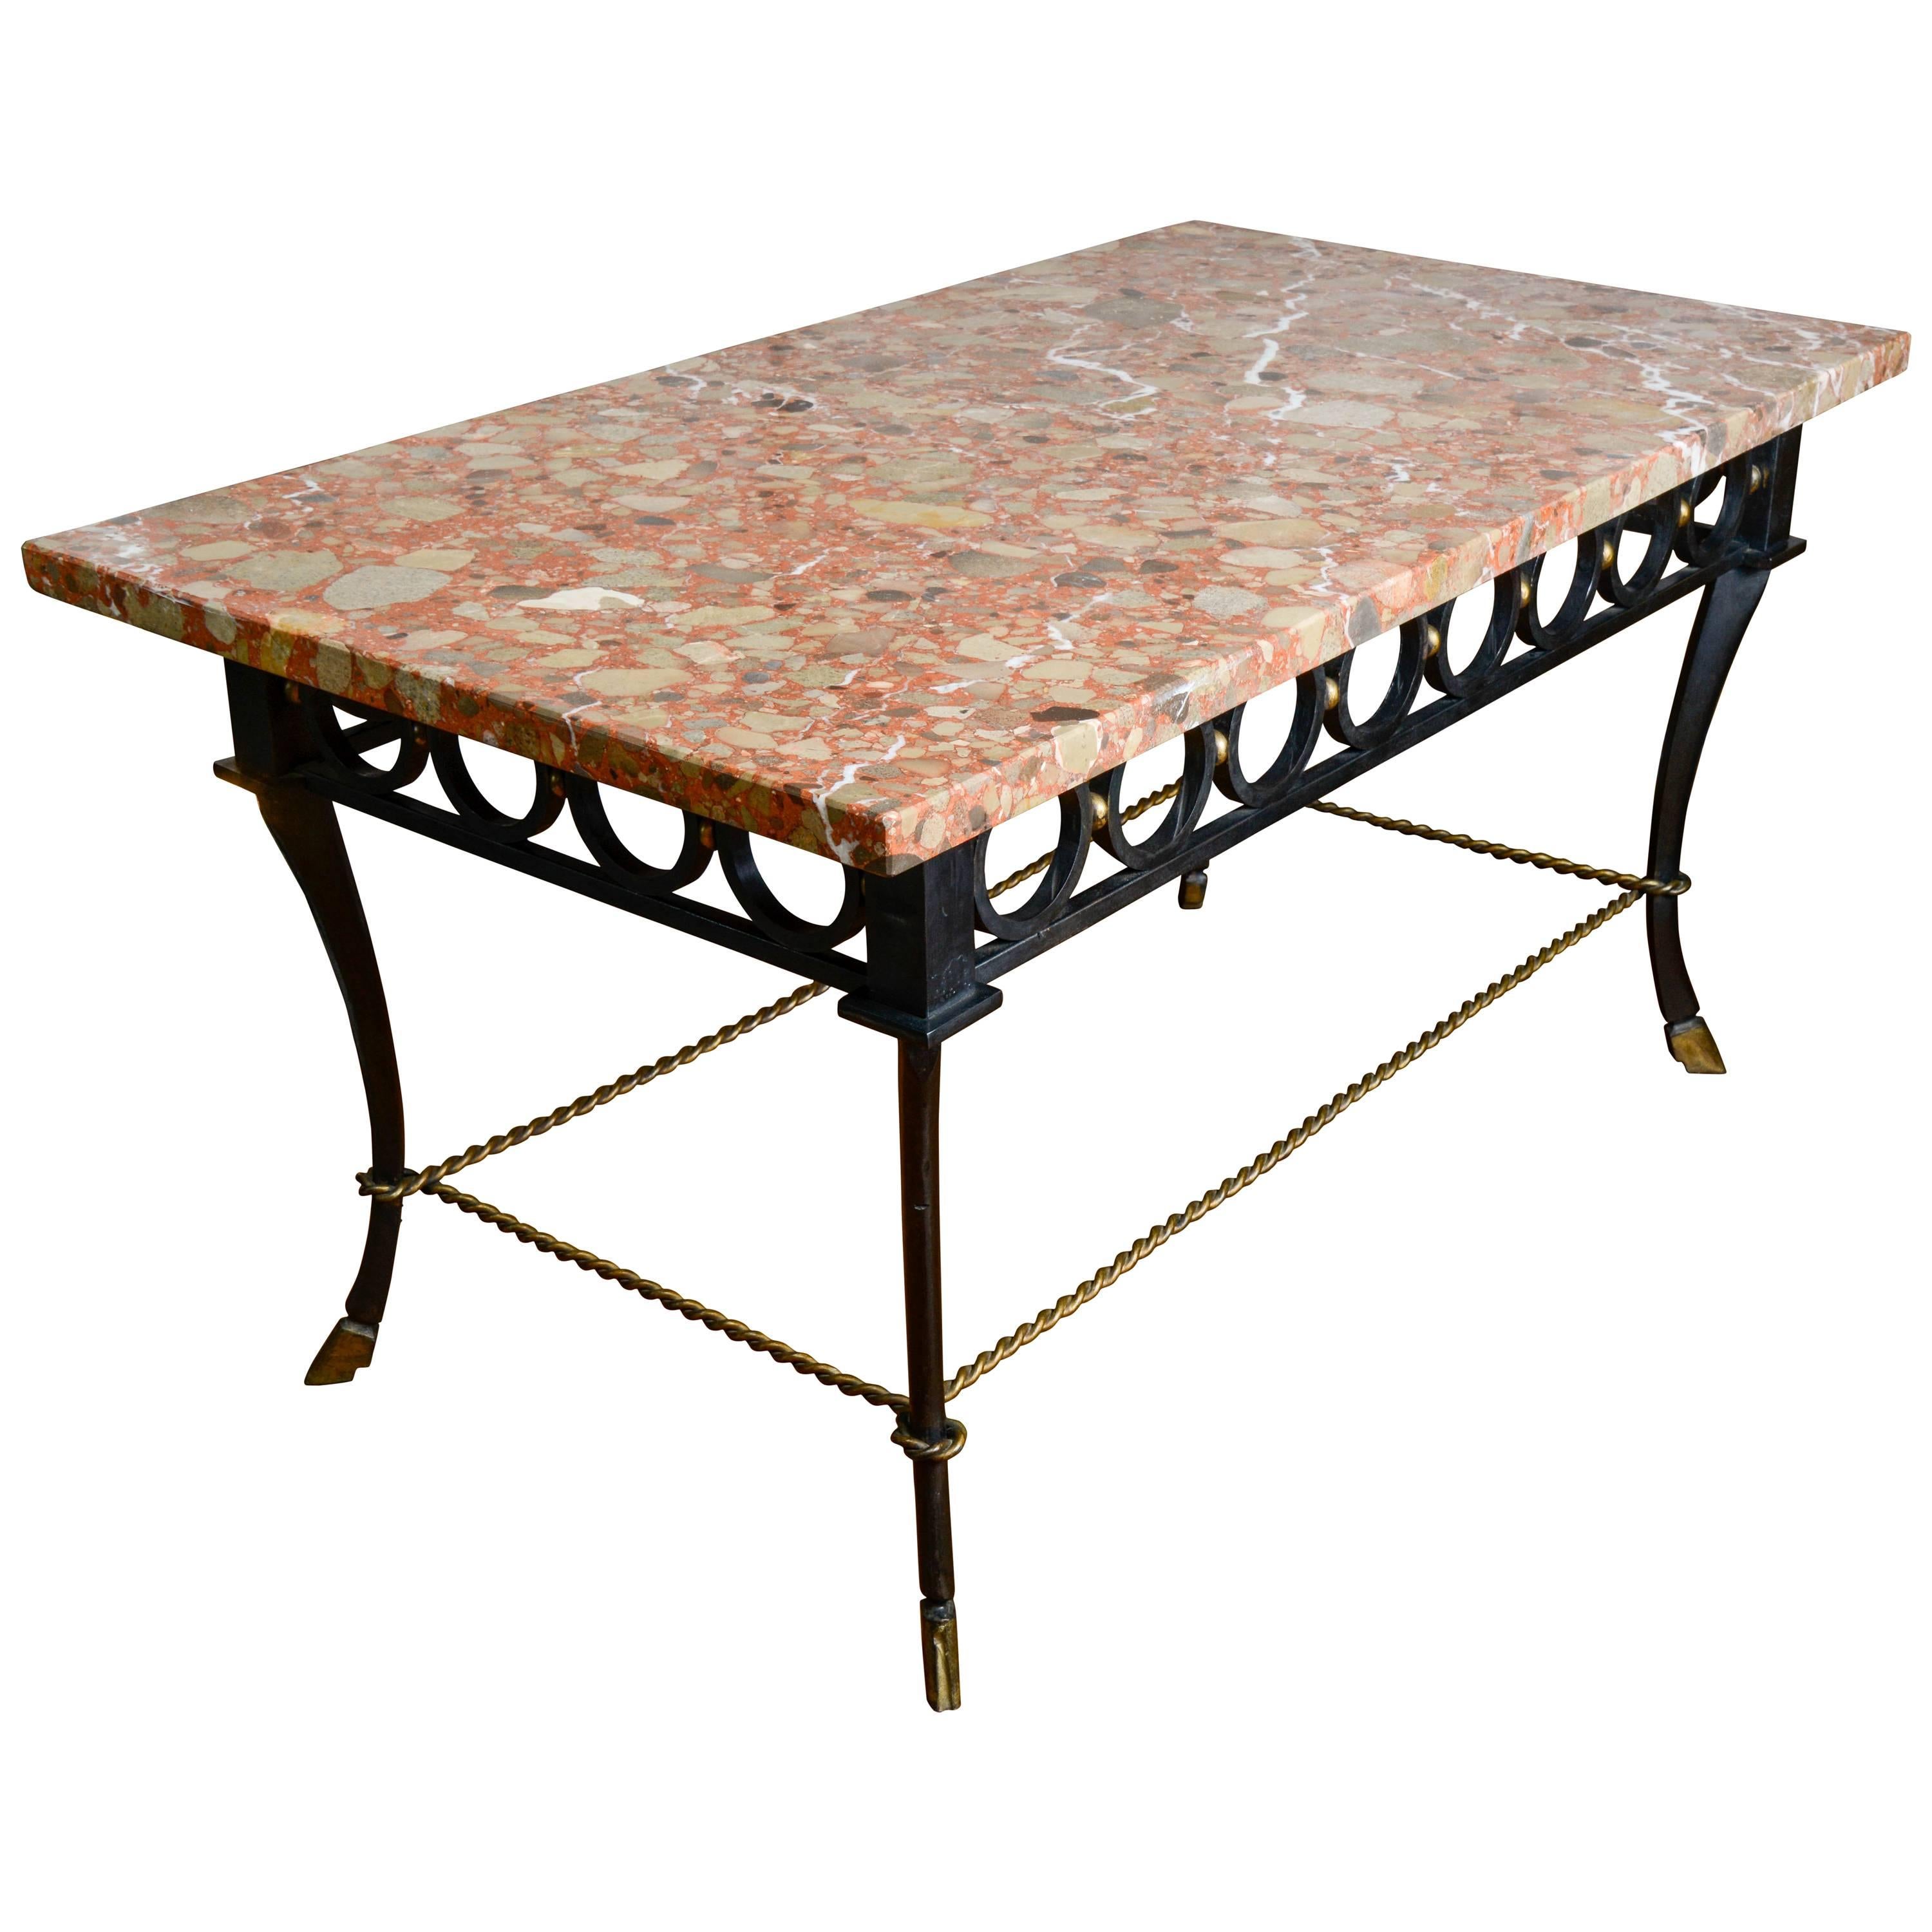 Gilbert Poillerat Polychrome Marble and Gilt Wrought Iron, 1942-1949 For Sale